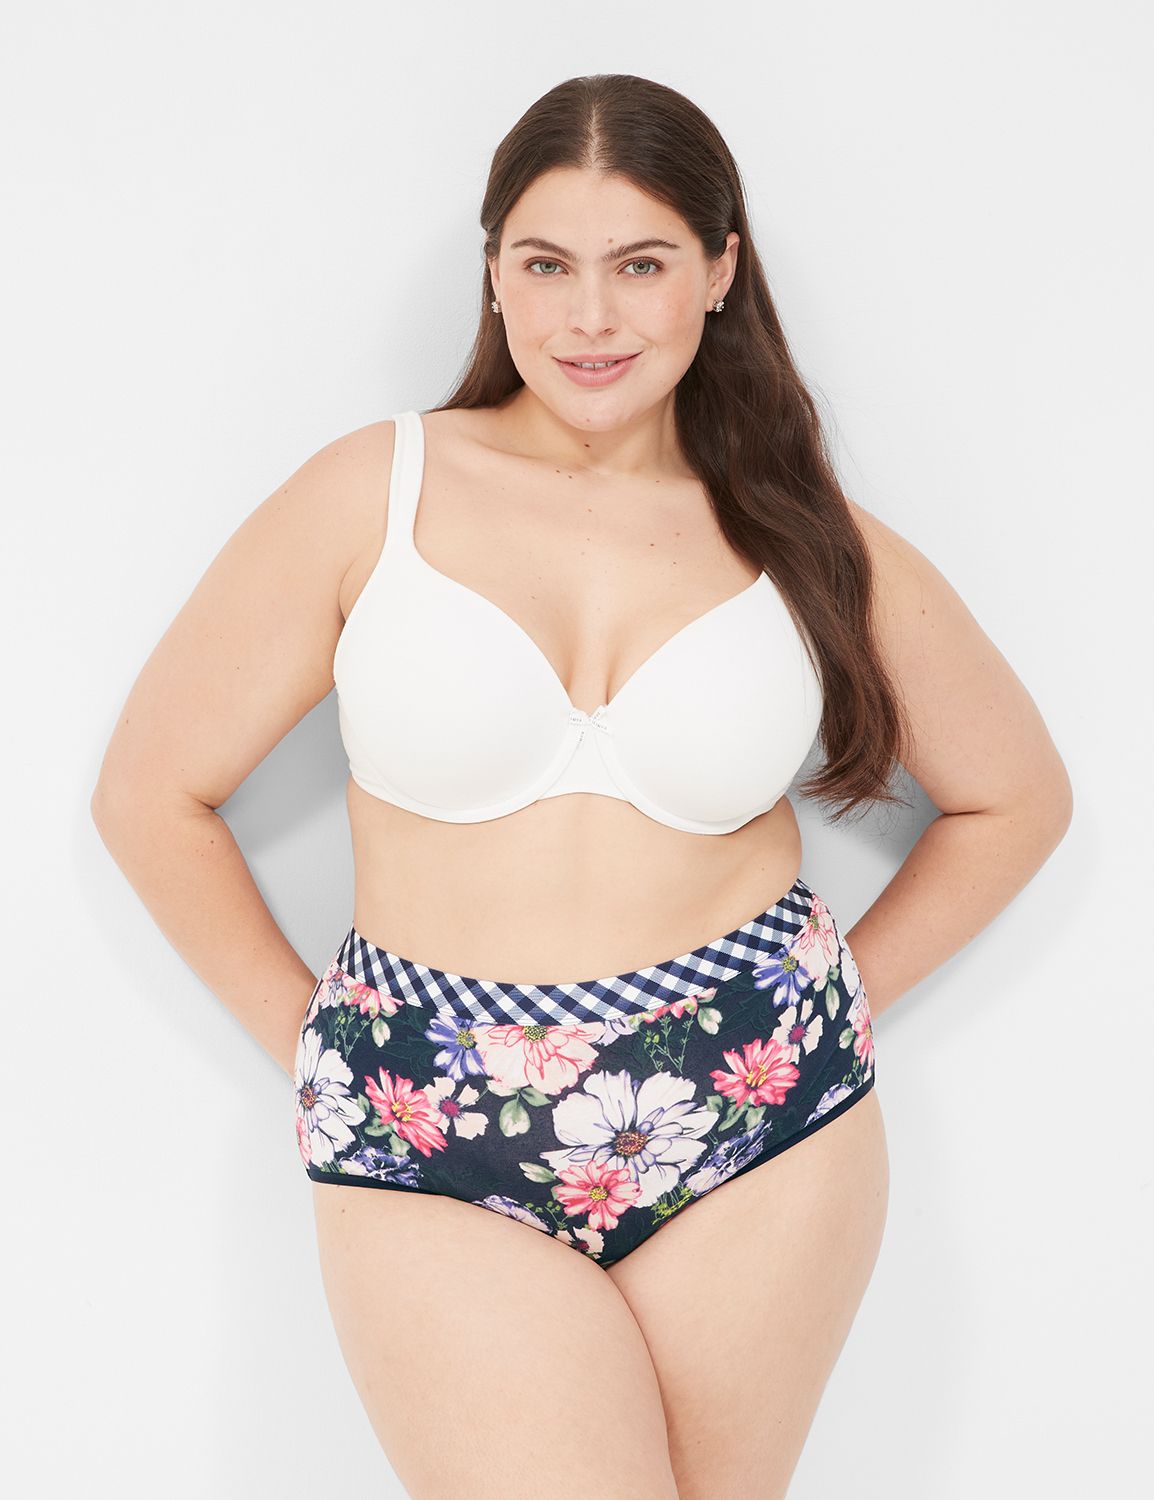 Plus Size Intimate Apparel, Lingerie & Swimsuits